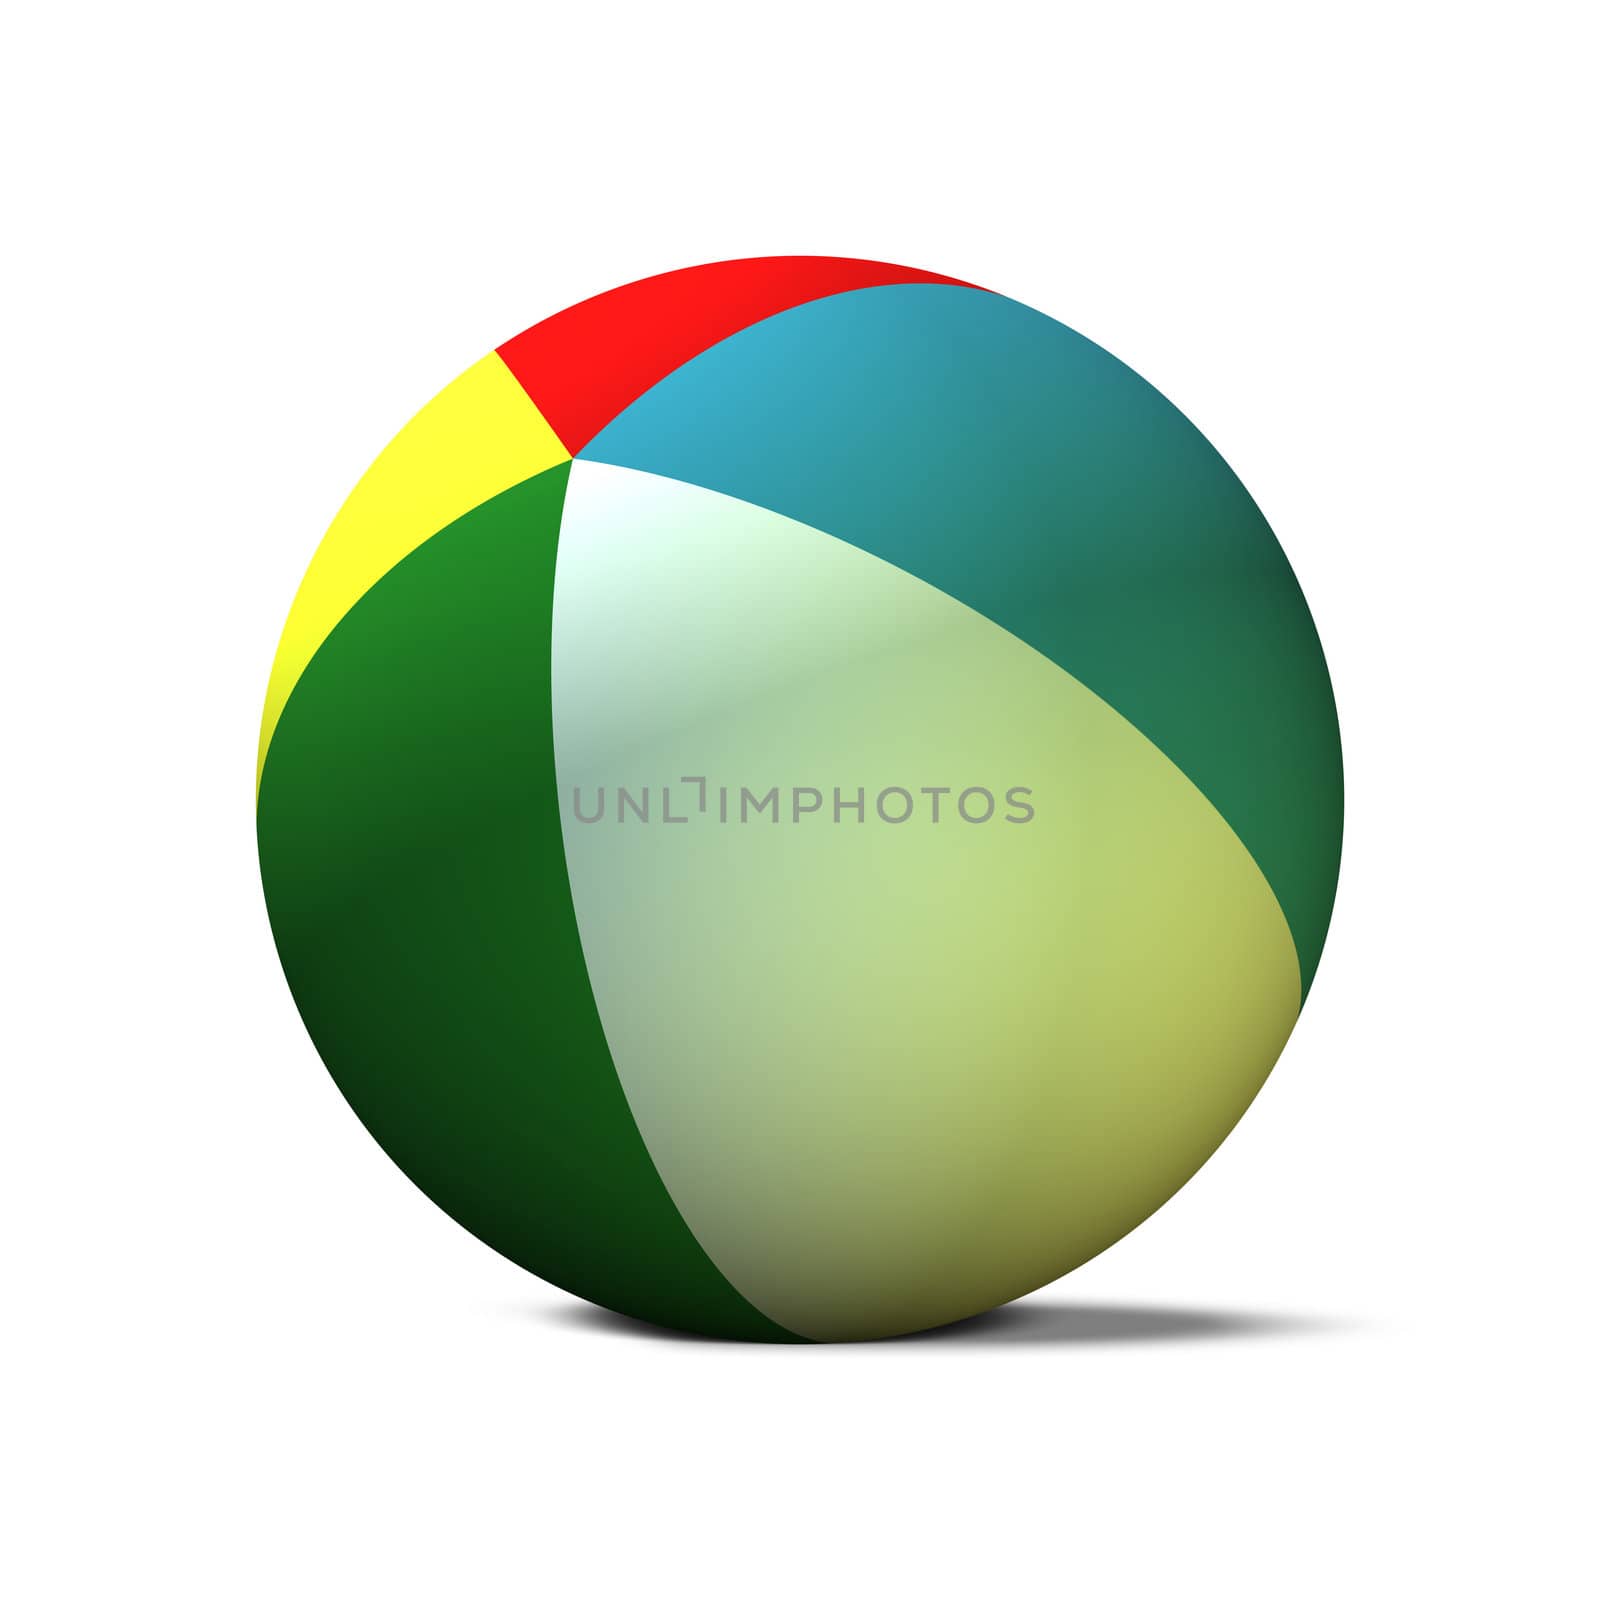 3D Beachball (traditional ball made of colored stripes)